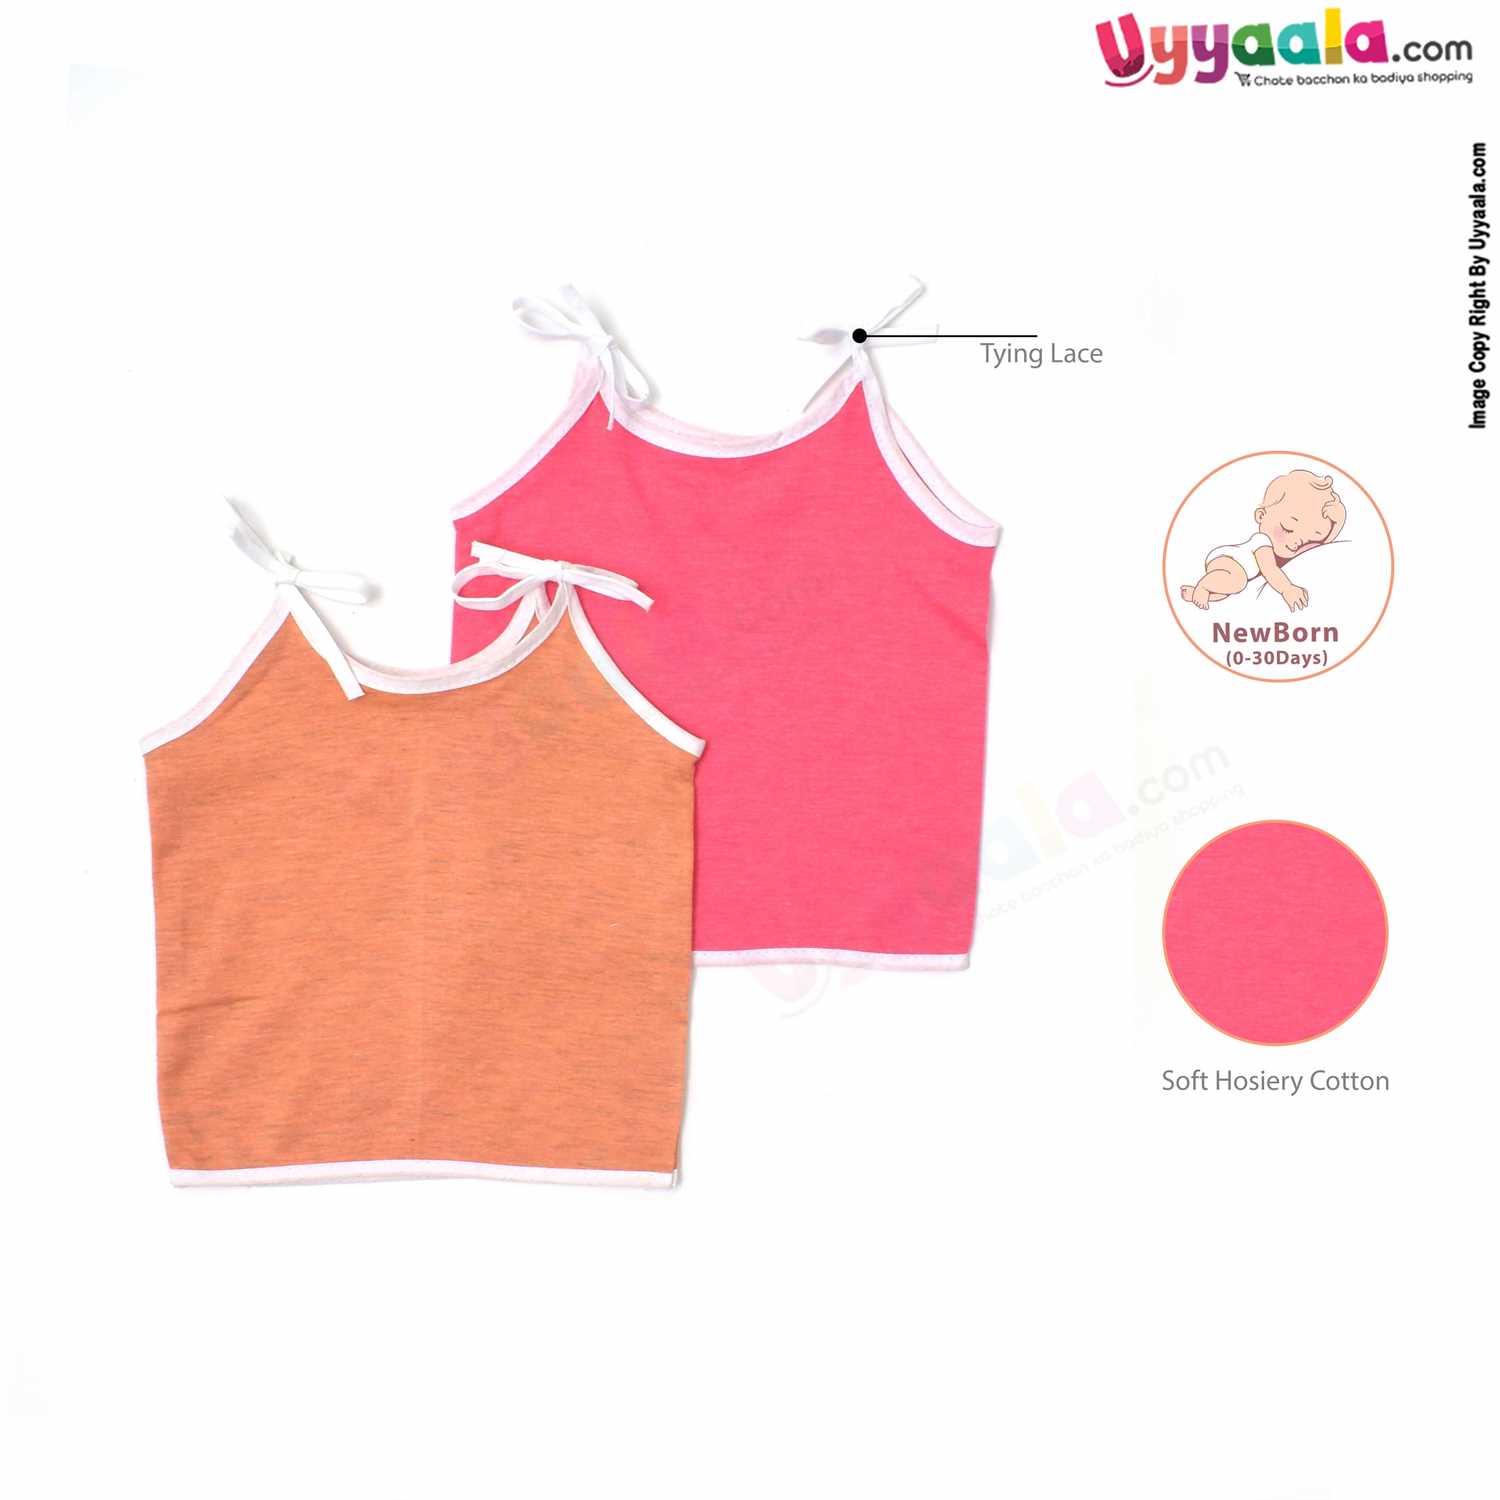 SNUG UP Sleeveless Baby Jabla Set, Top Opening Tie knot Lace Model, Premium Quality Cotton Baby Wear, (0-30 Days), 2Pack - Pink & Orange